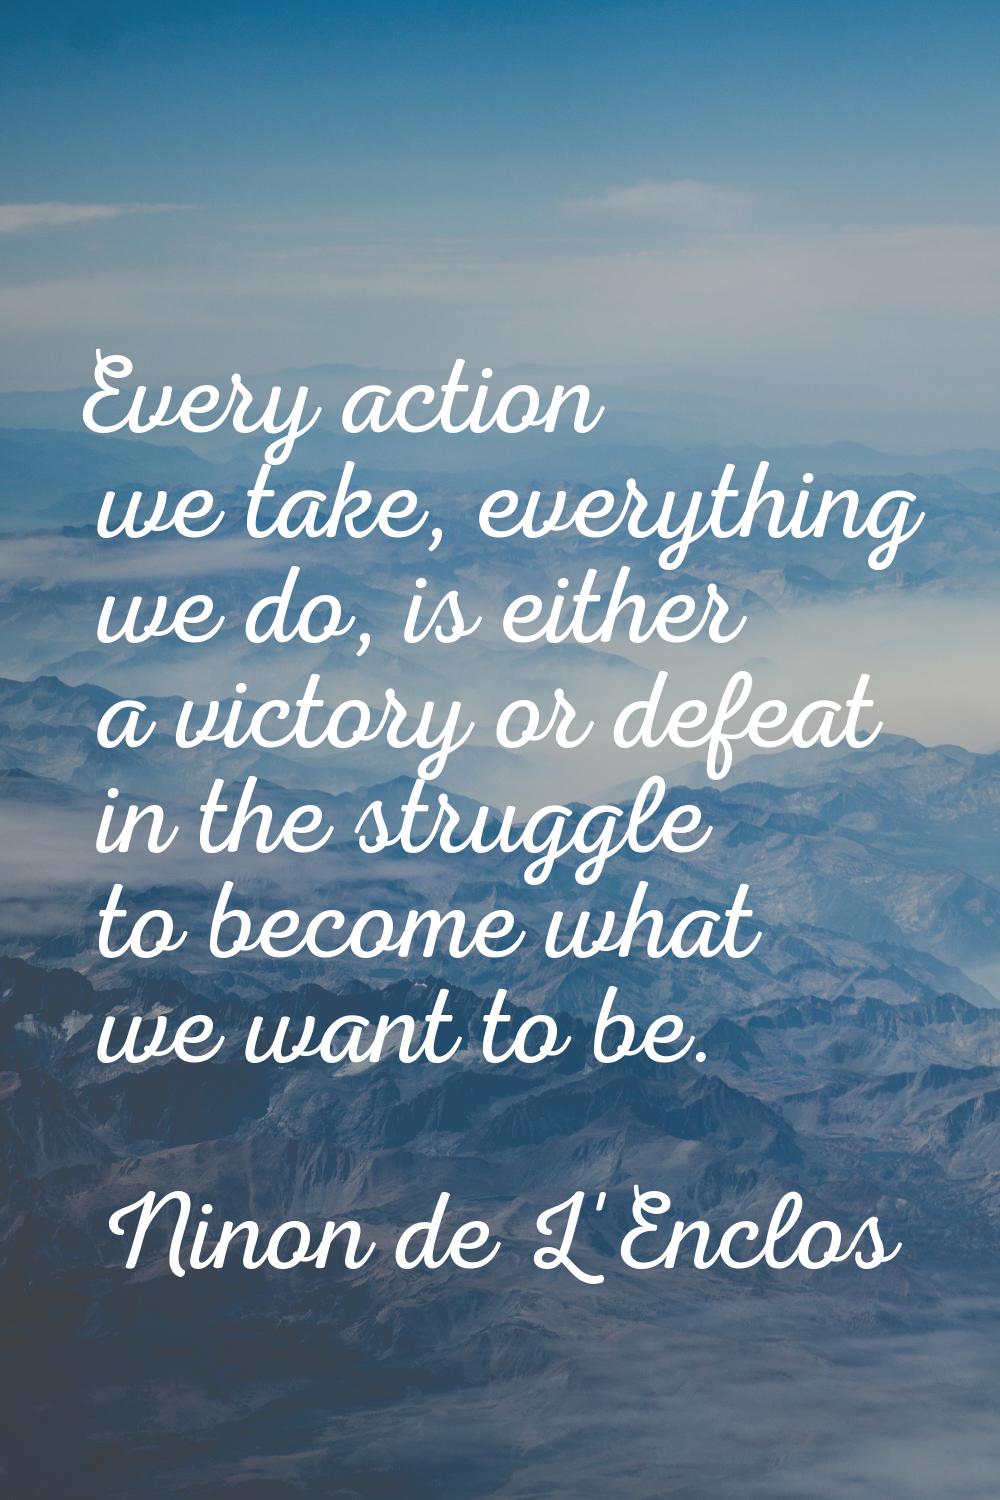 Every action we take, everything we do, is either a victory or defeat in the struggle to become wha